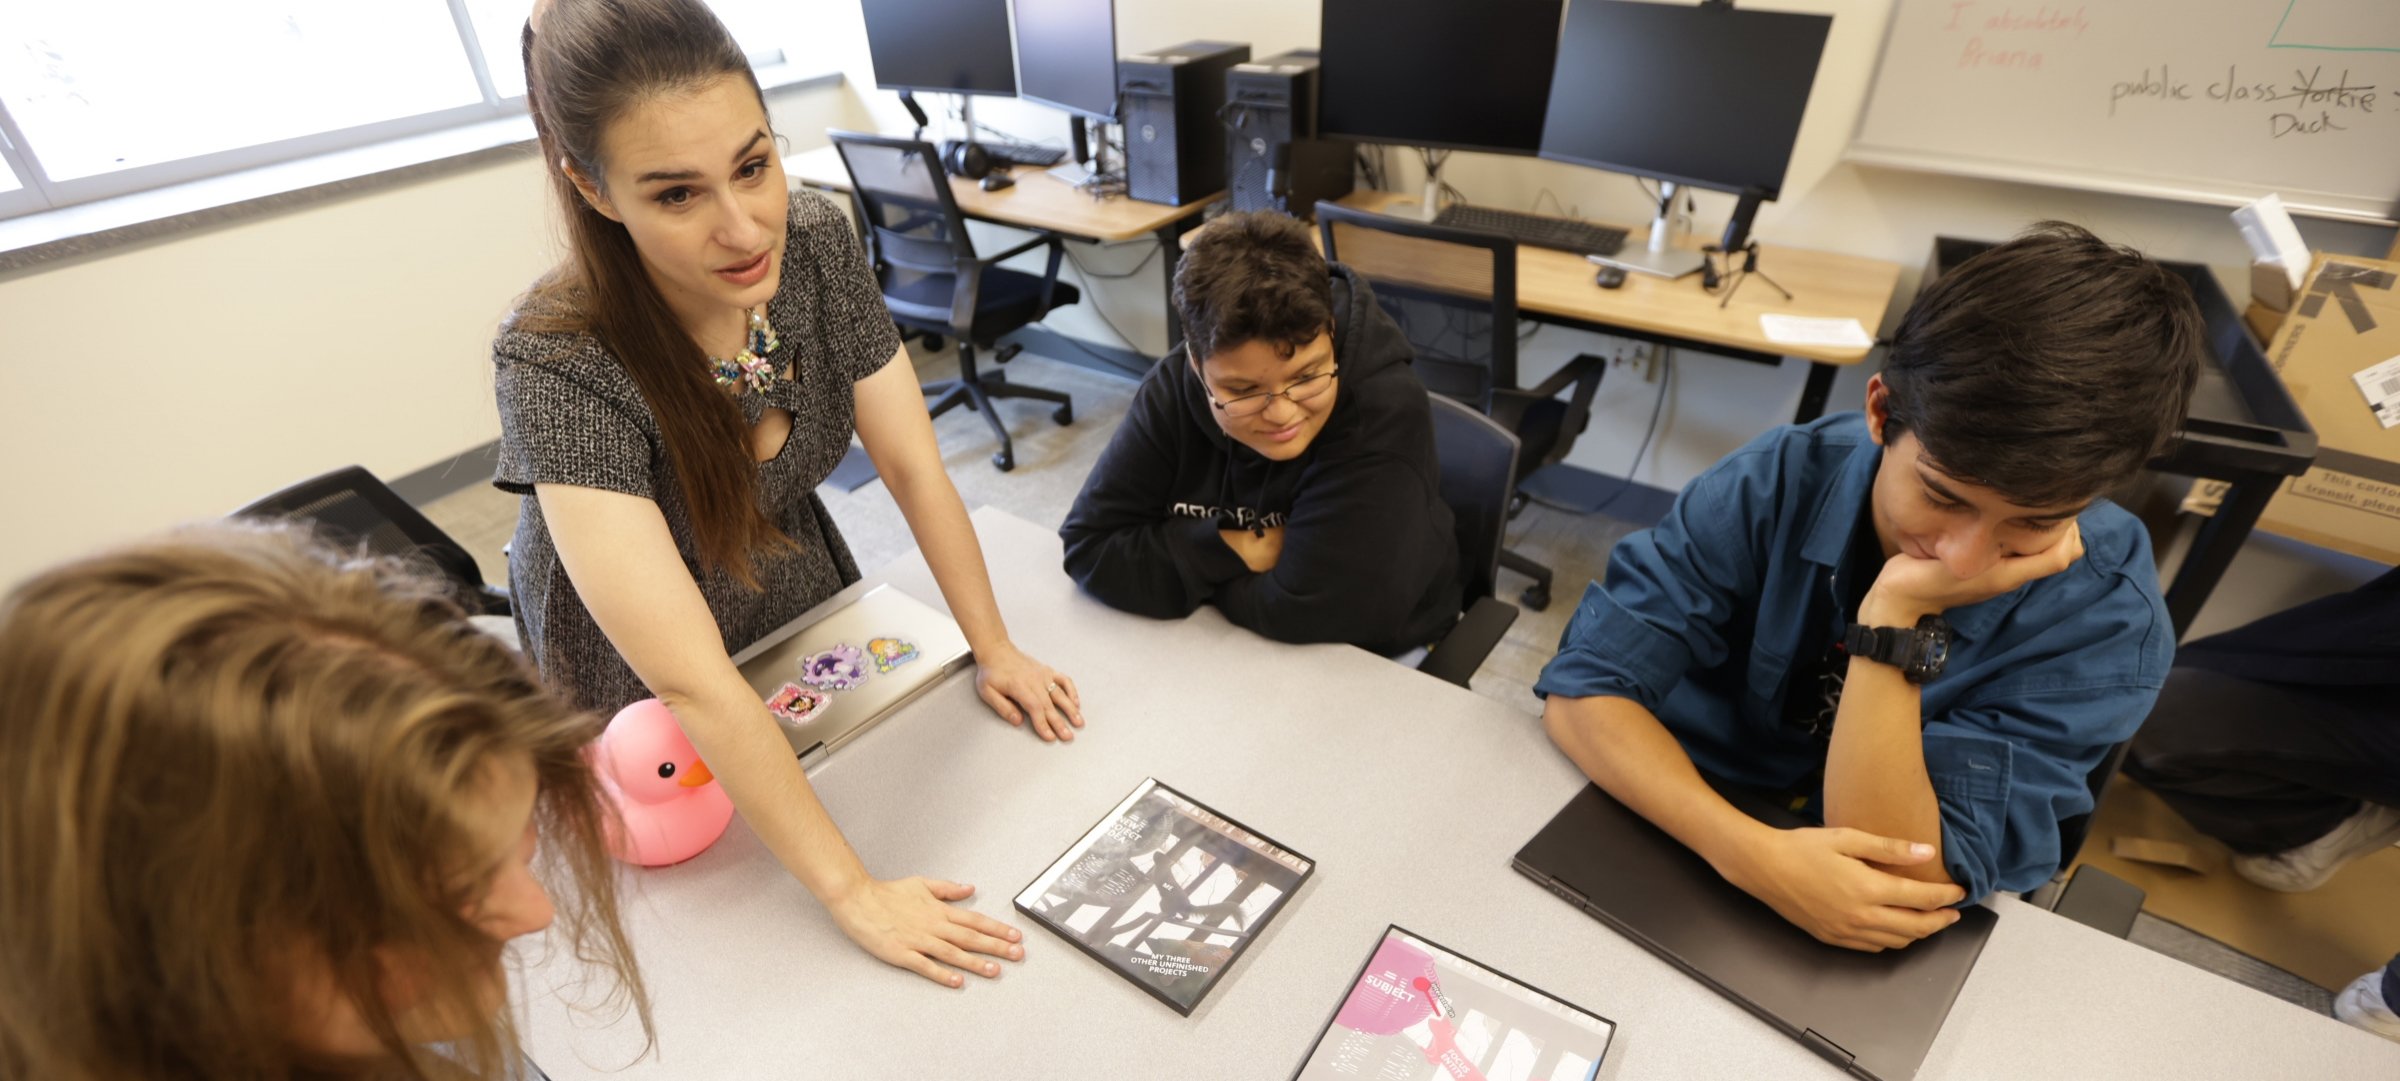 CS instructor Briana Bettin and undergraduate students learn about programming.